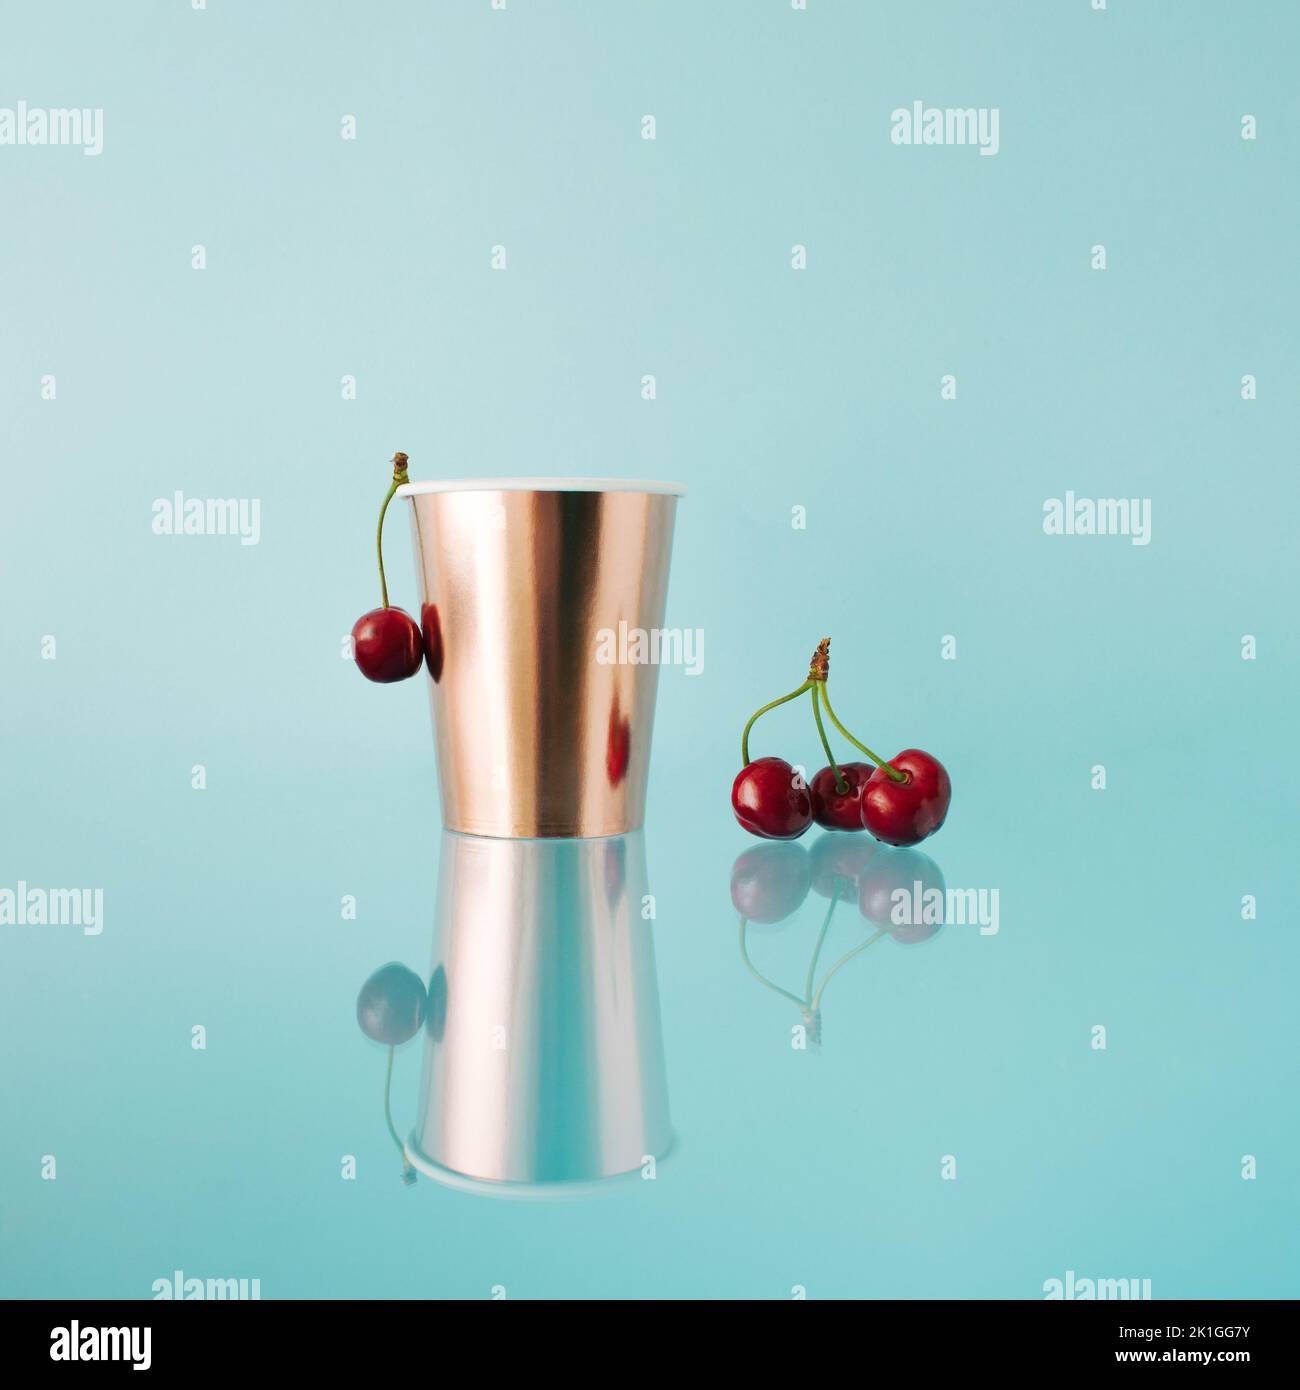 Golden paper cup with fresh cherries on blue reflecting background. Mirror reflection. Stock Photo